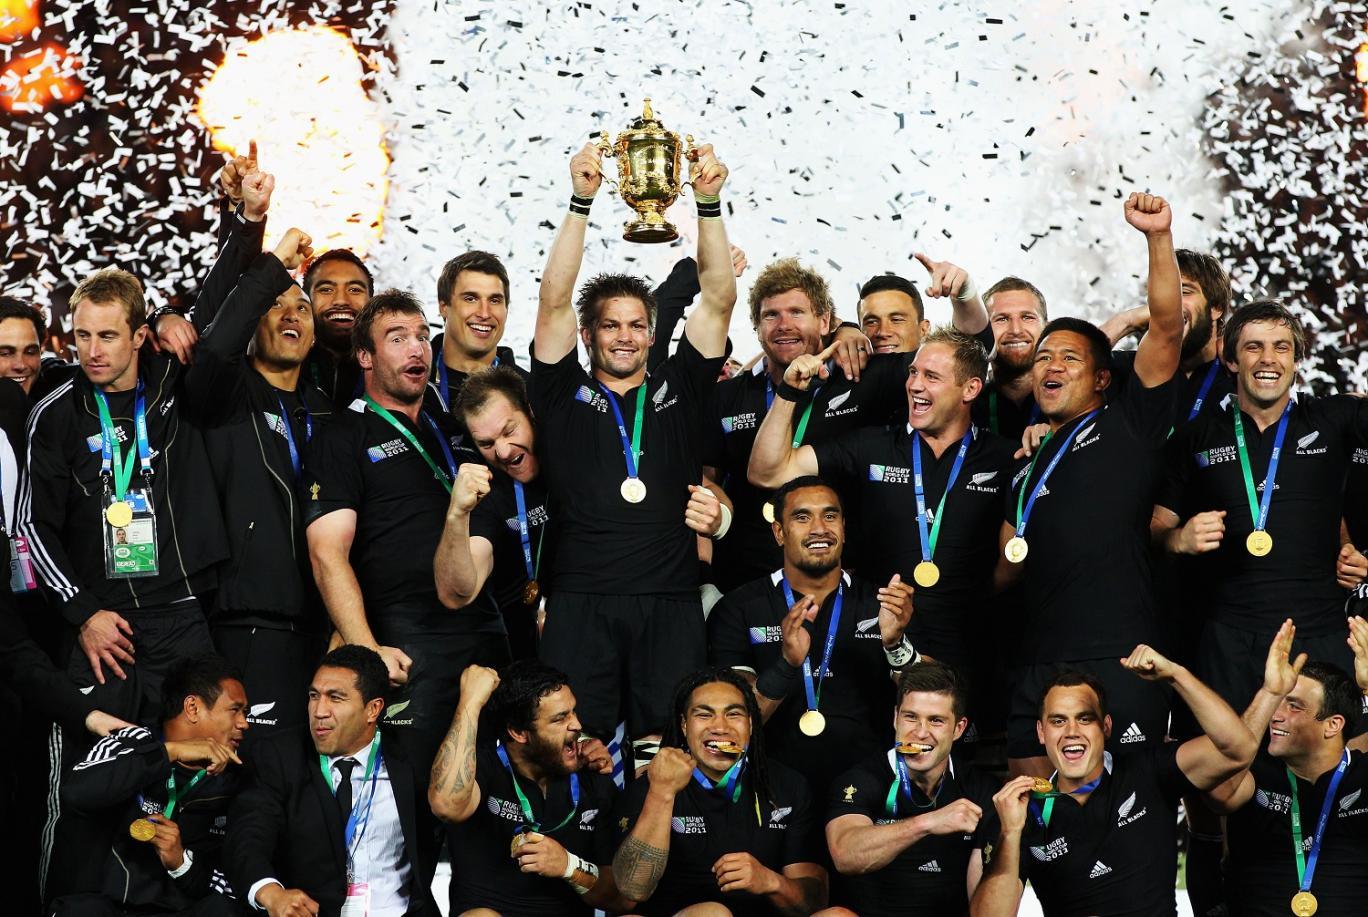 The 6 Most Amazing Moments From The 2015 Rugby World Cup